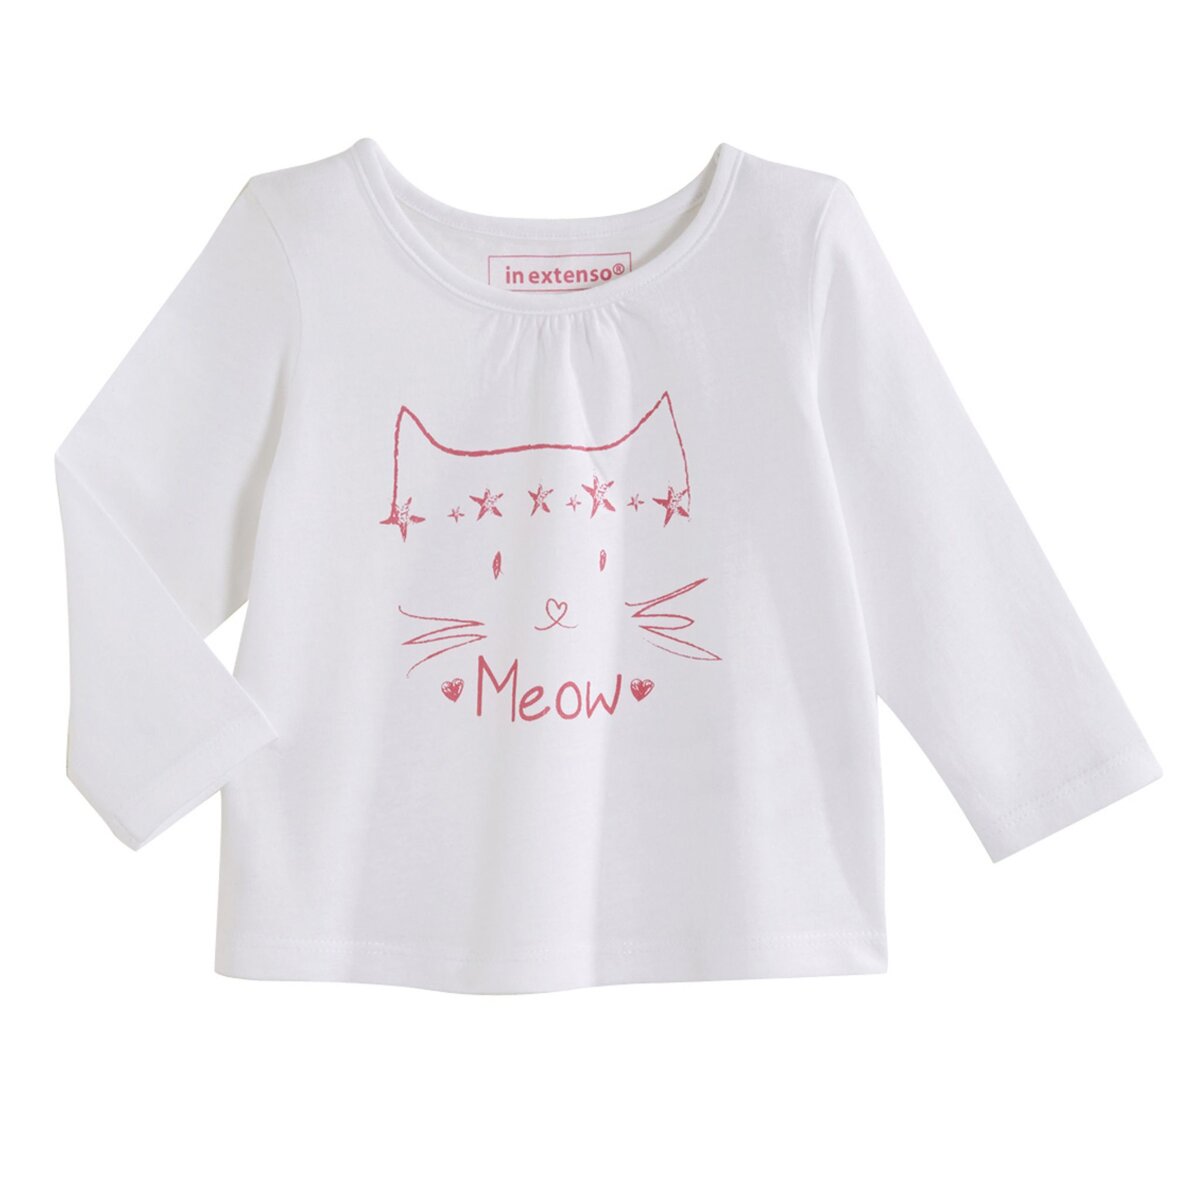 IN EXTENSO Tee-shirt chat manches longues bébé fille